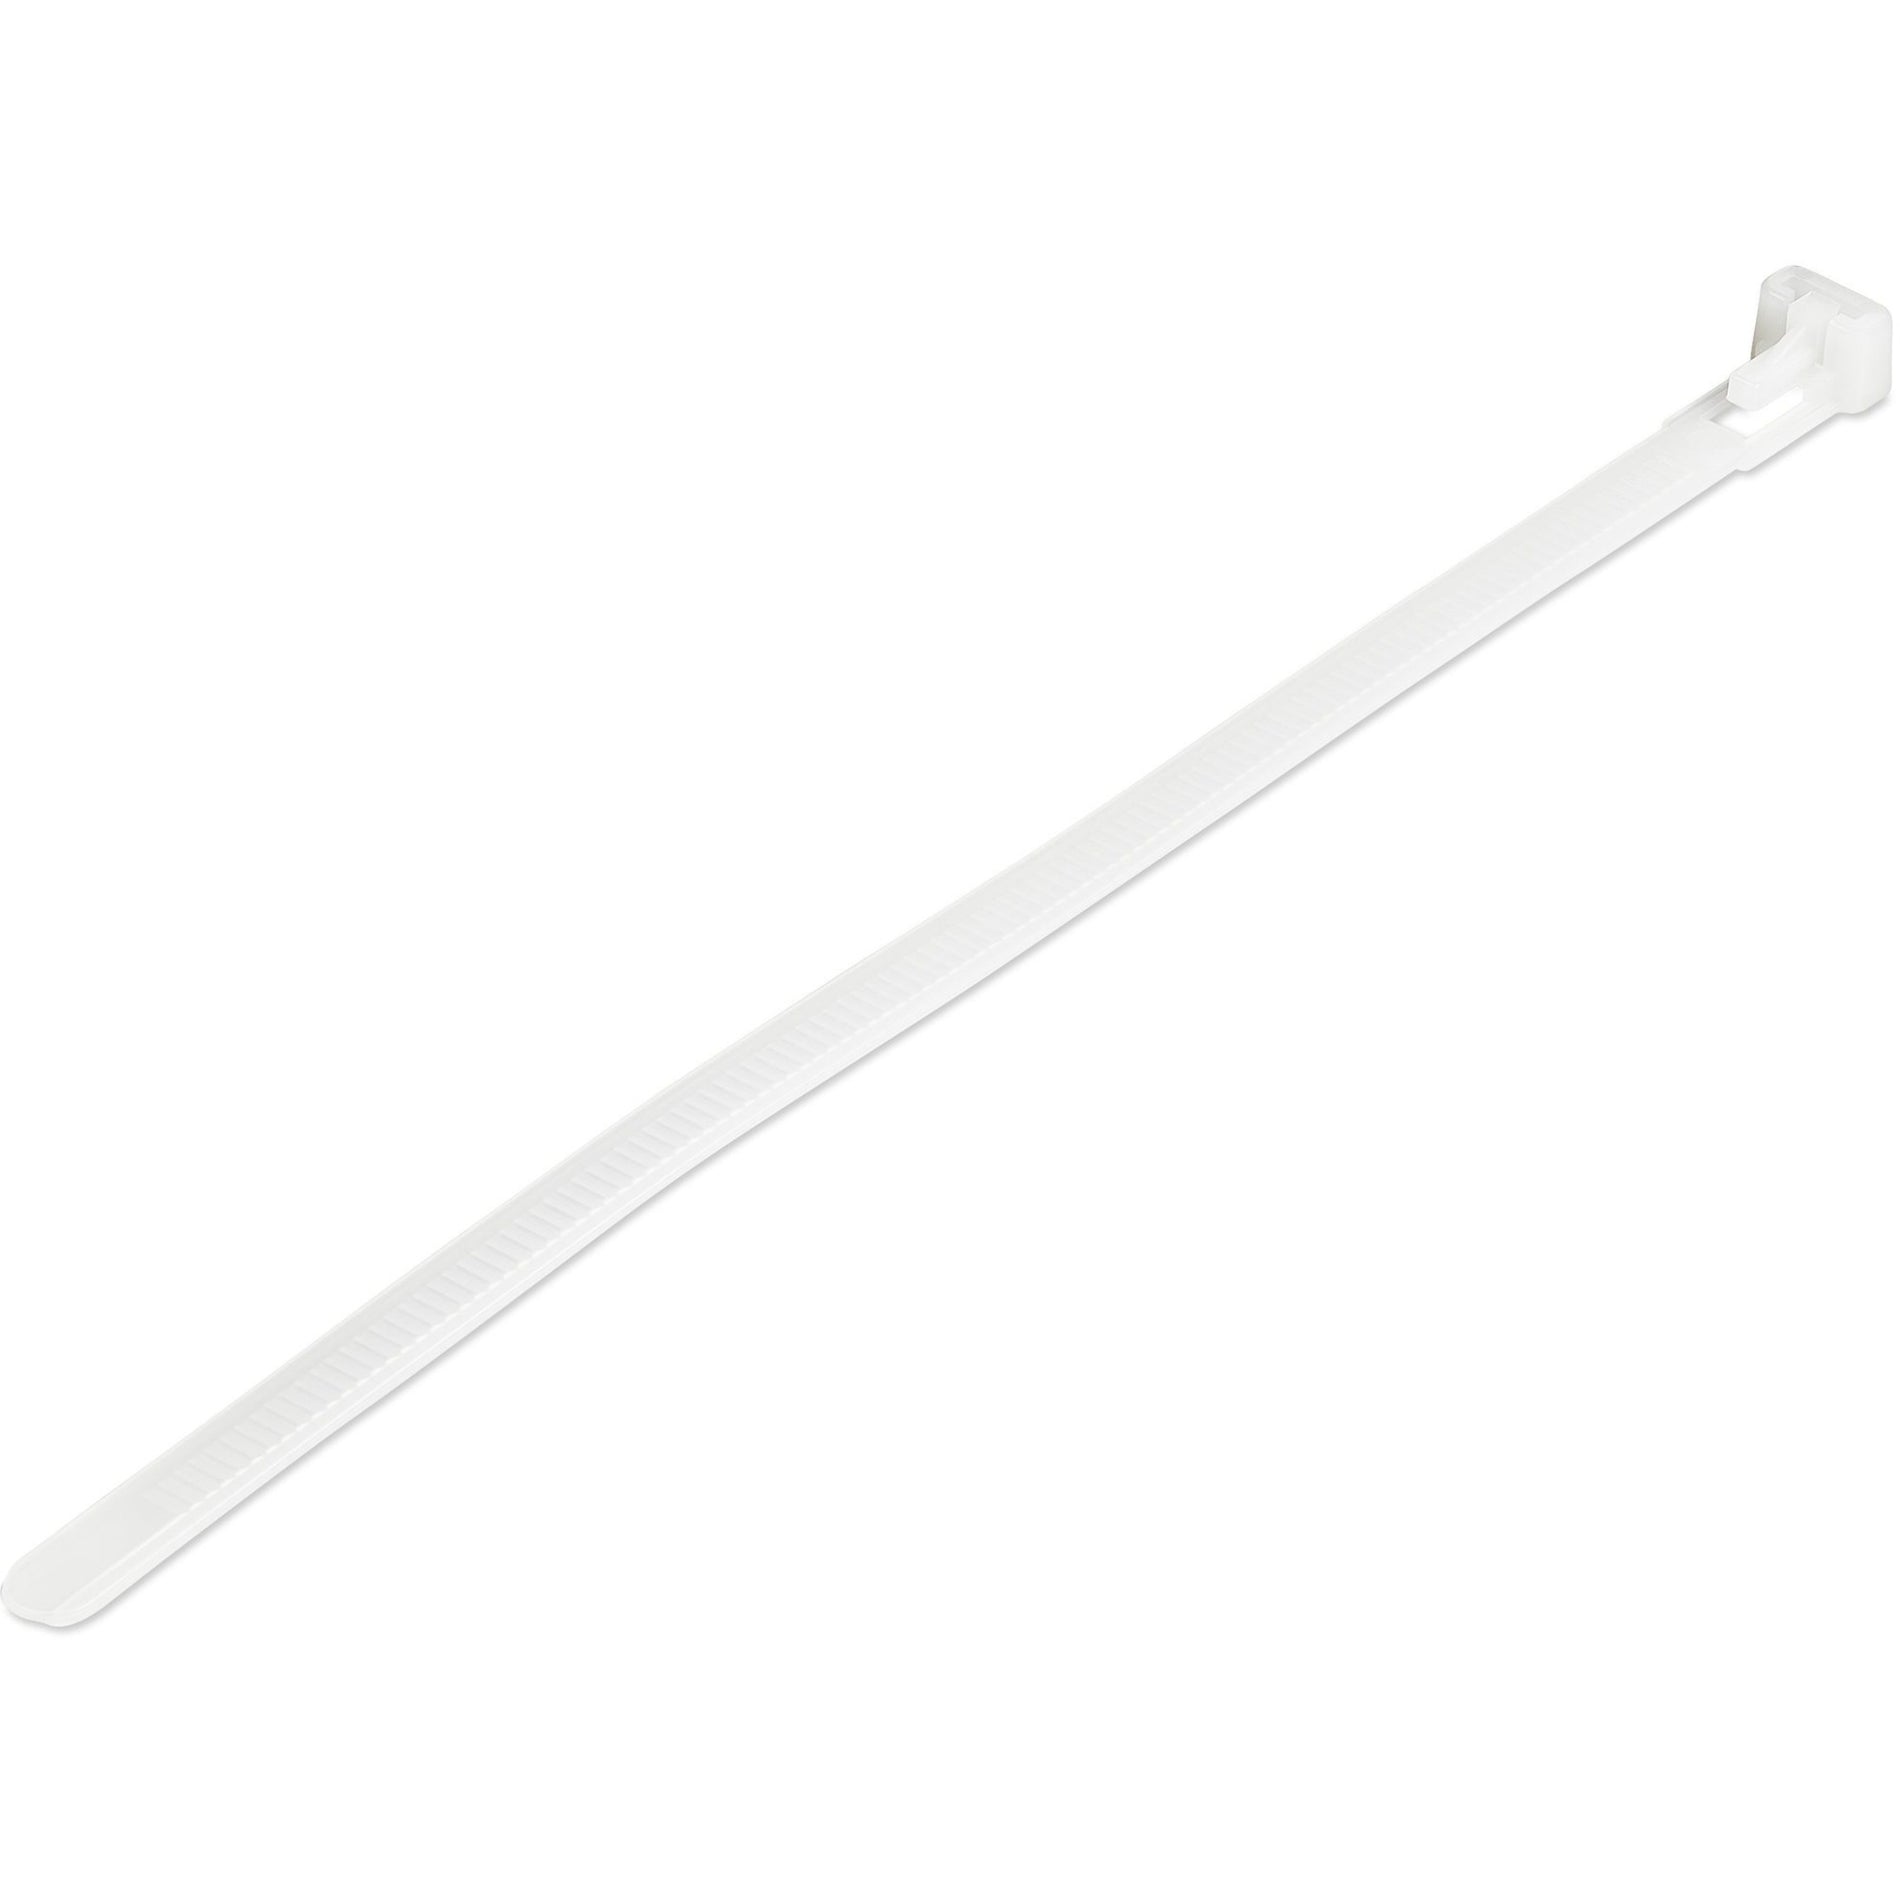 StarTech.com CBMZTRB8 100 Pack - 8 in. White Cable Ties, Resealable, TAA Compliant, 2 Year Warranty